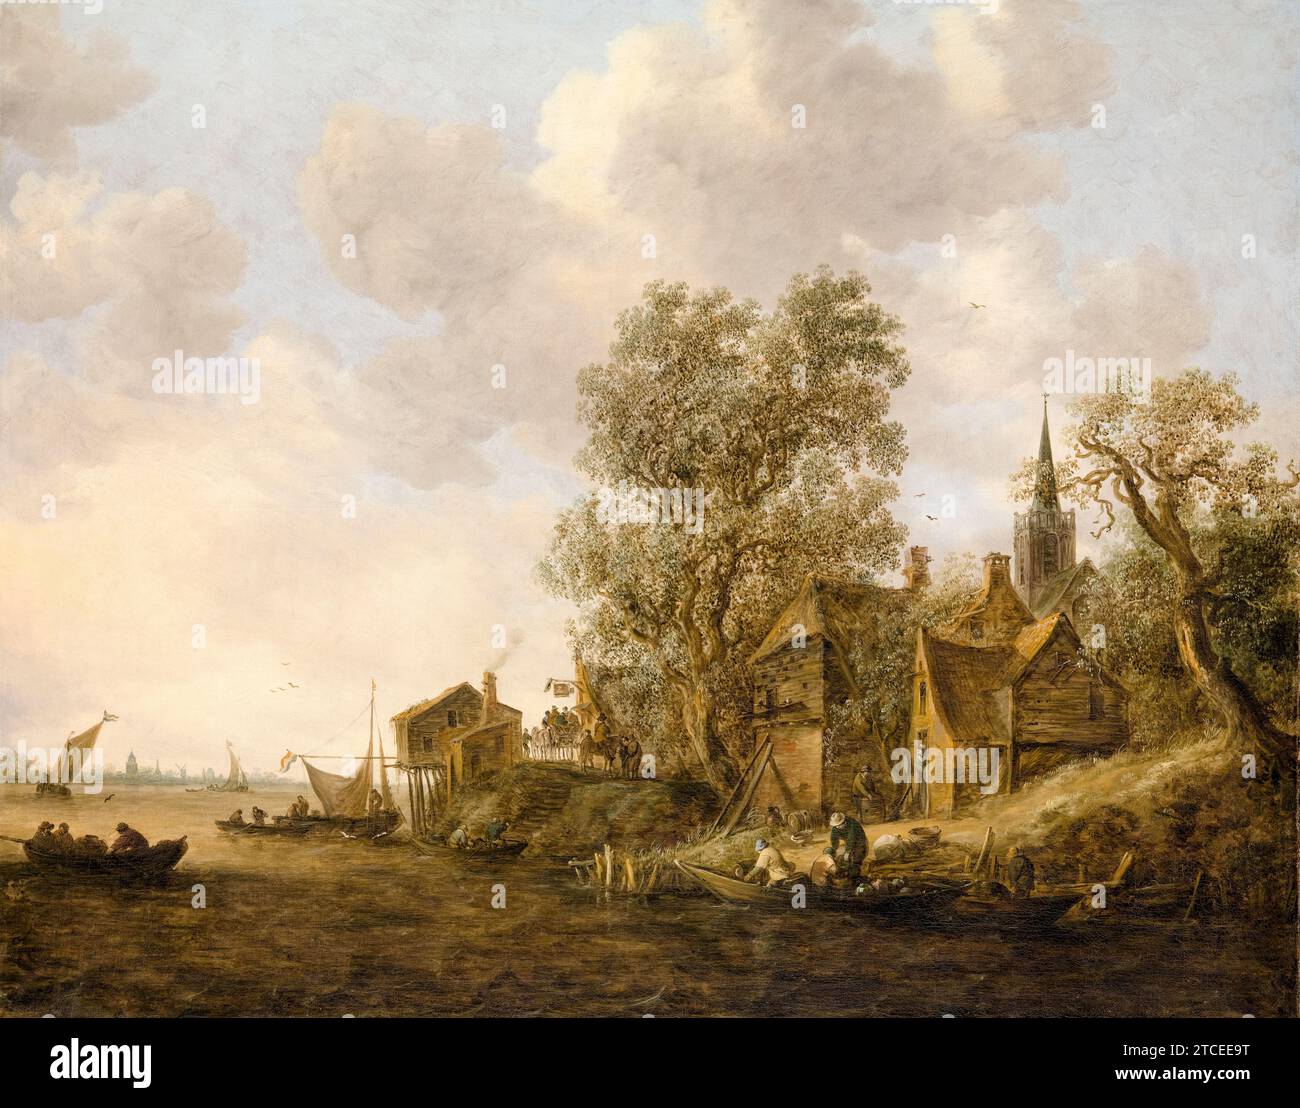 Jan van Goyen, View of a Town on a River, landscape painting in oil on canvas, 1645 Stock Photo